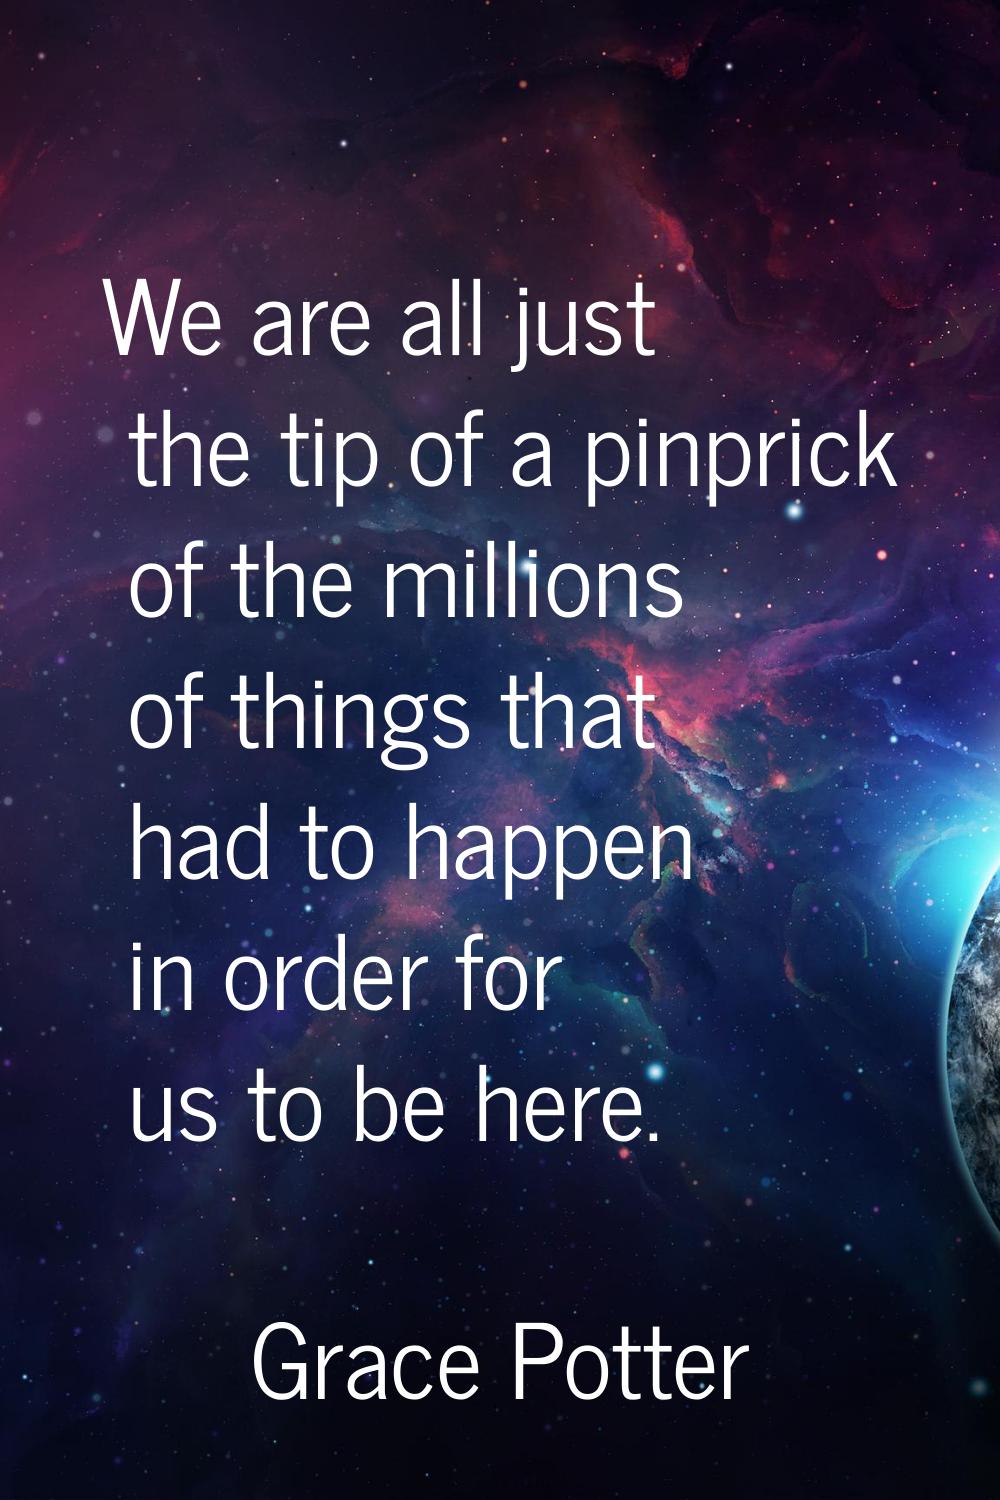 We are all just the tip of a pinprick of the millions of things that had to happen in order for us 